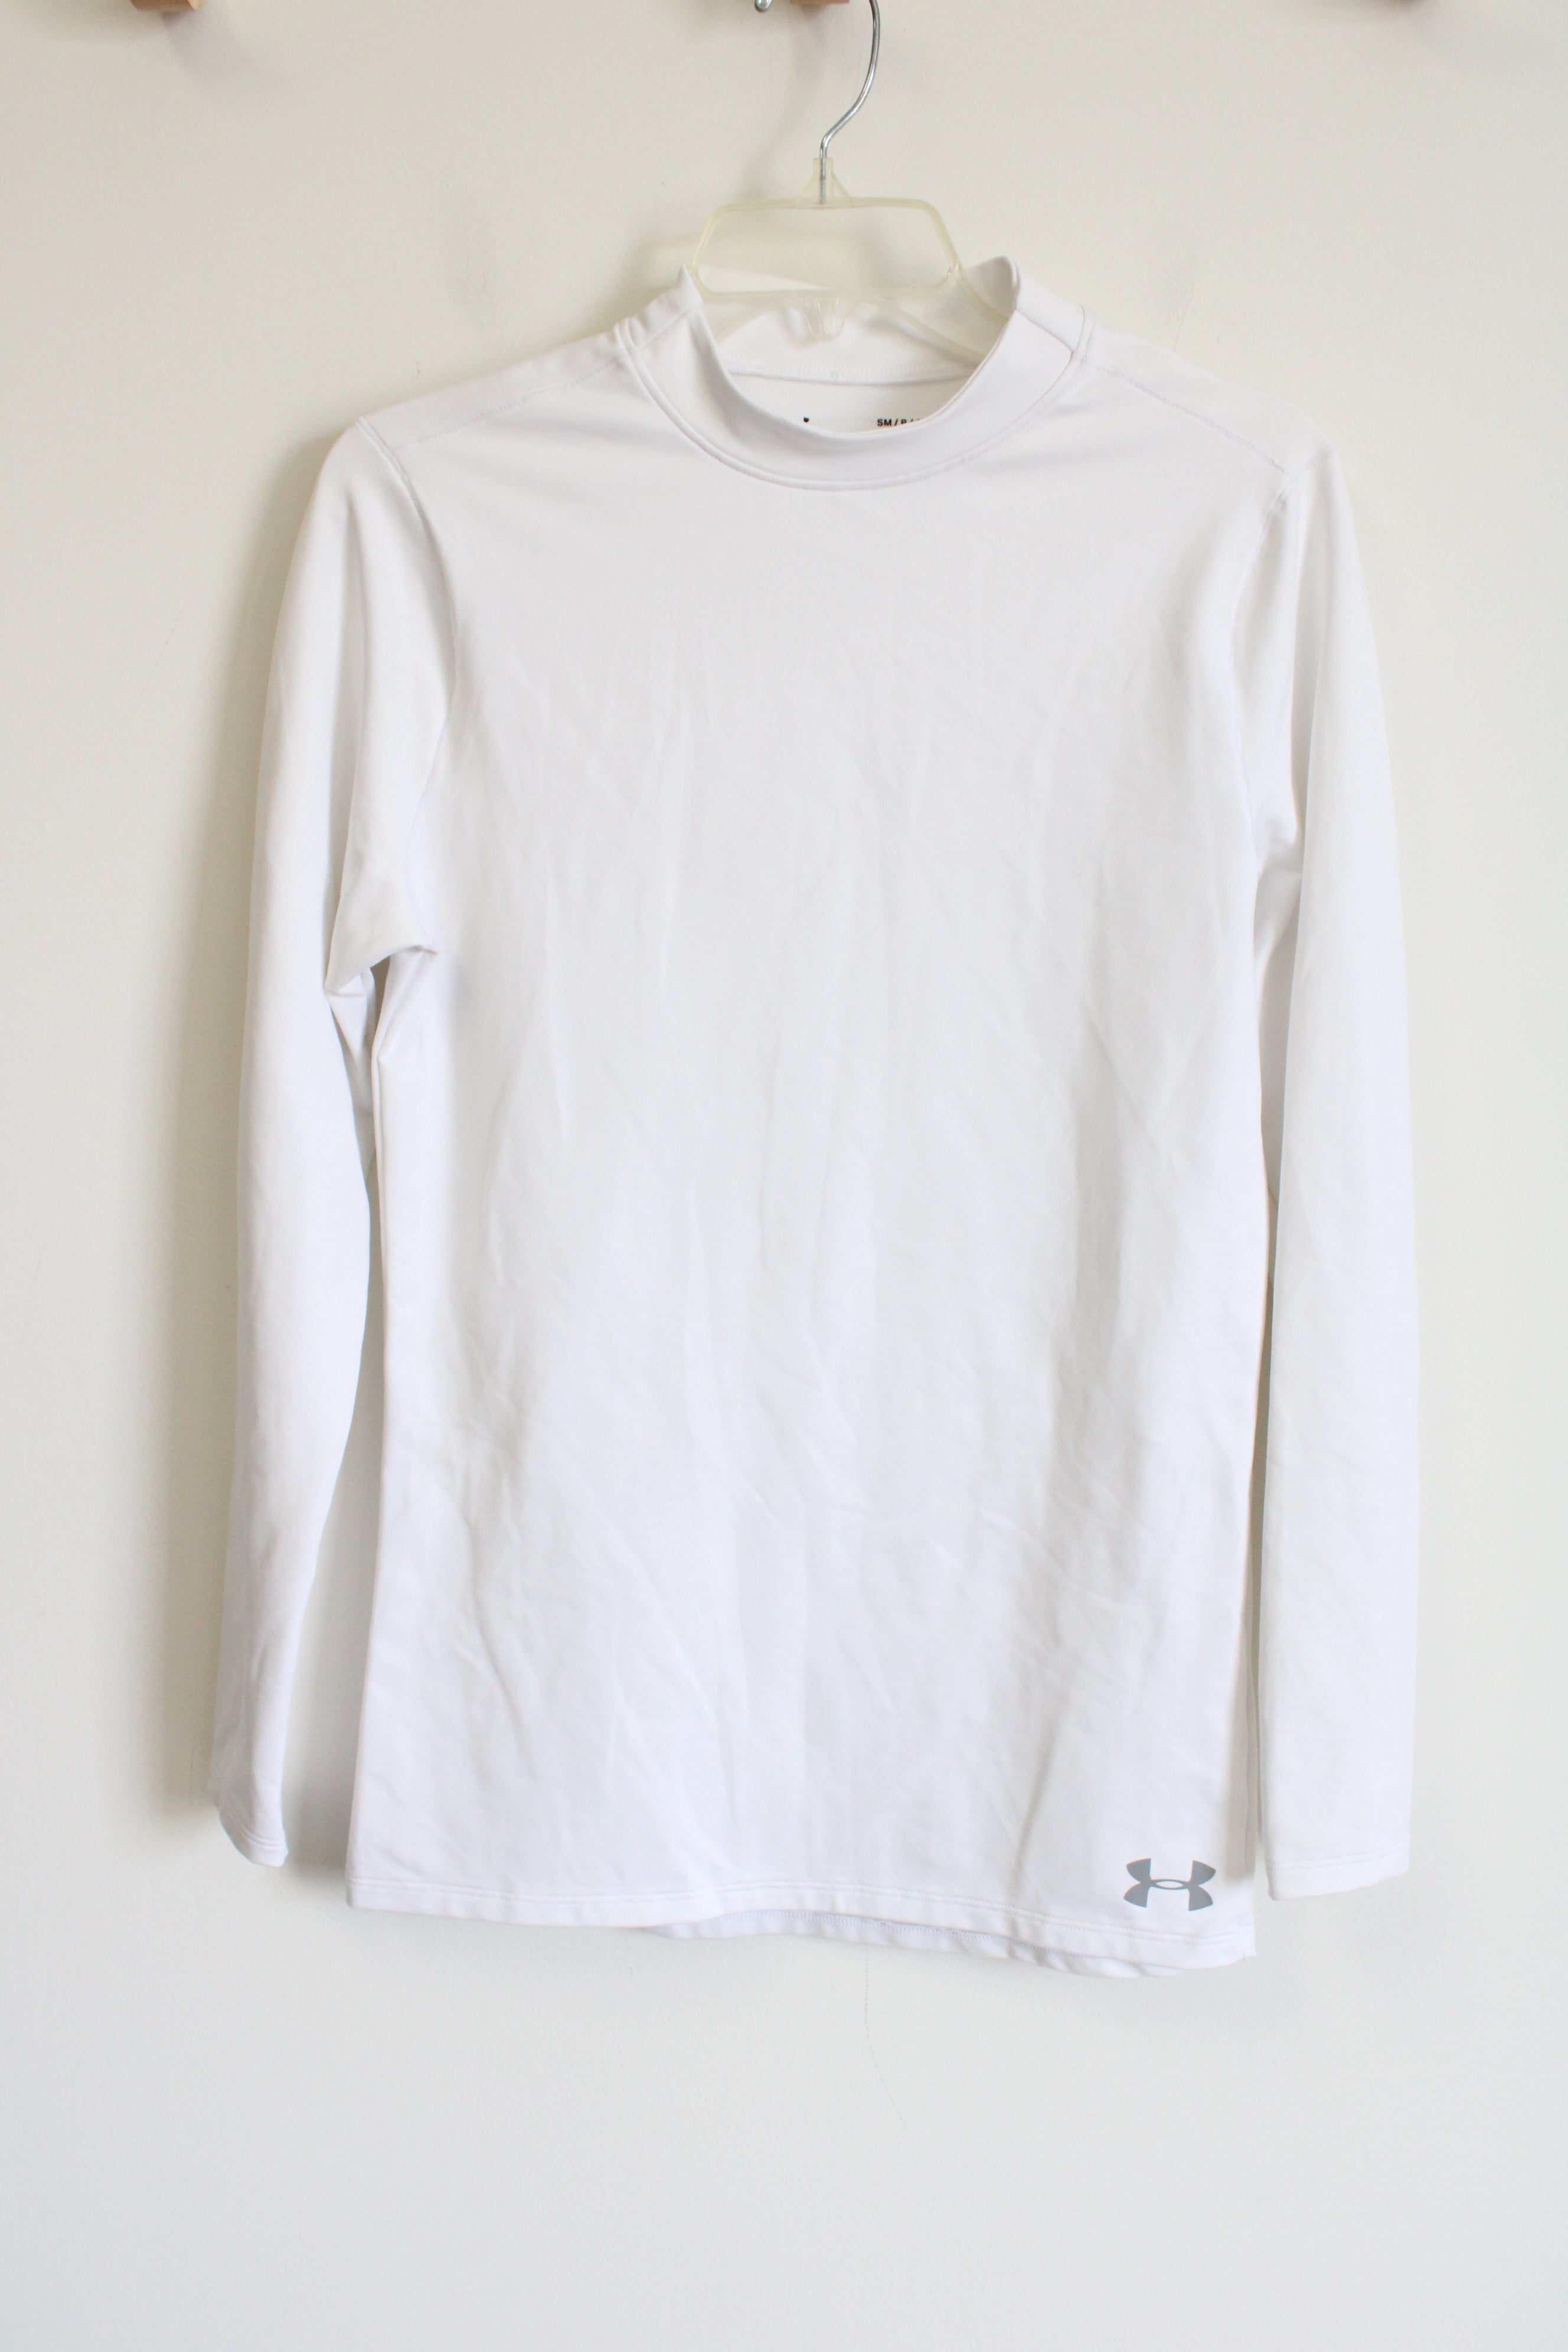 Under Armour White Cold Gear Fitted Long Sleeved Shirt | S